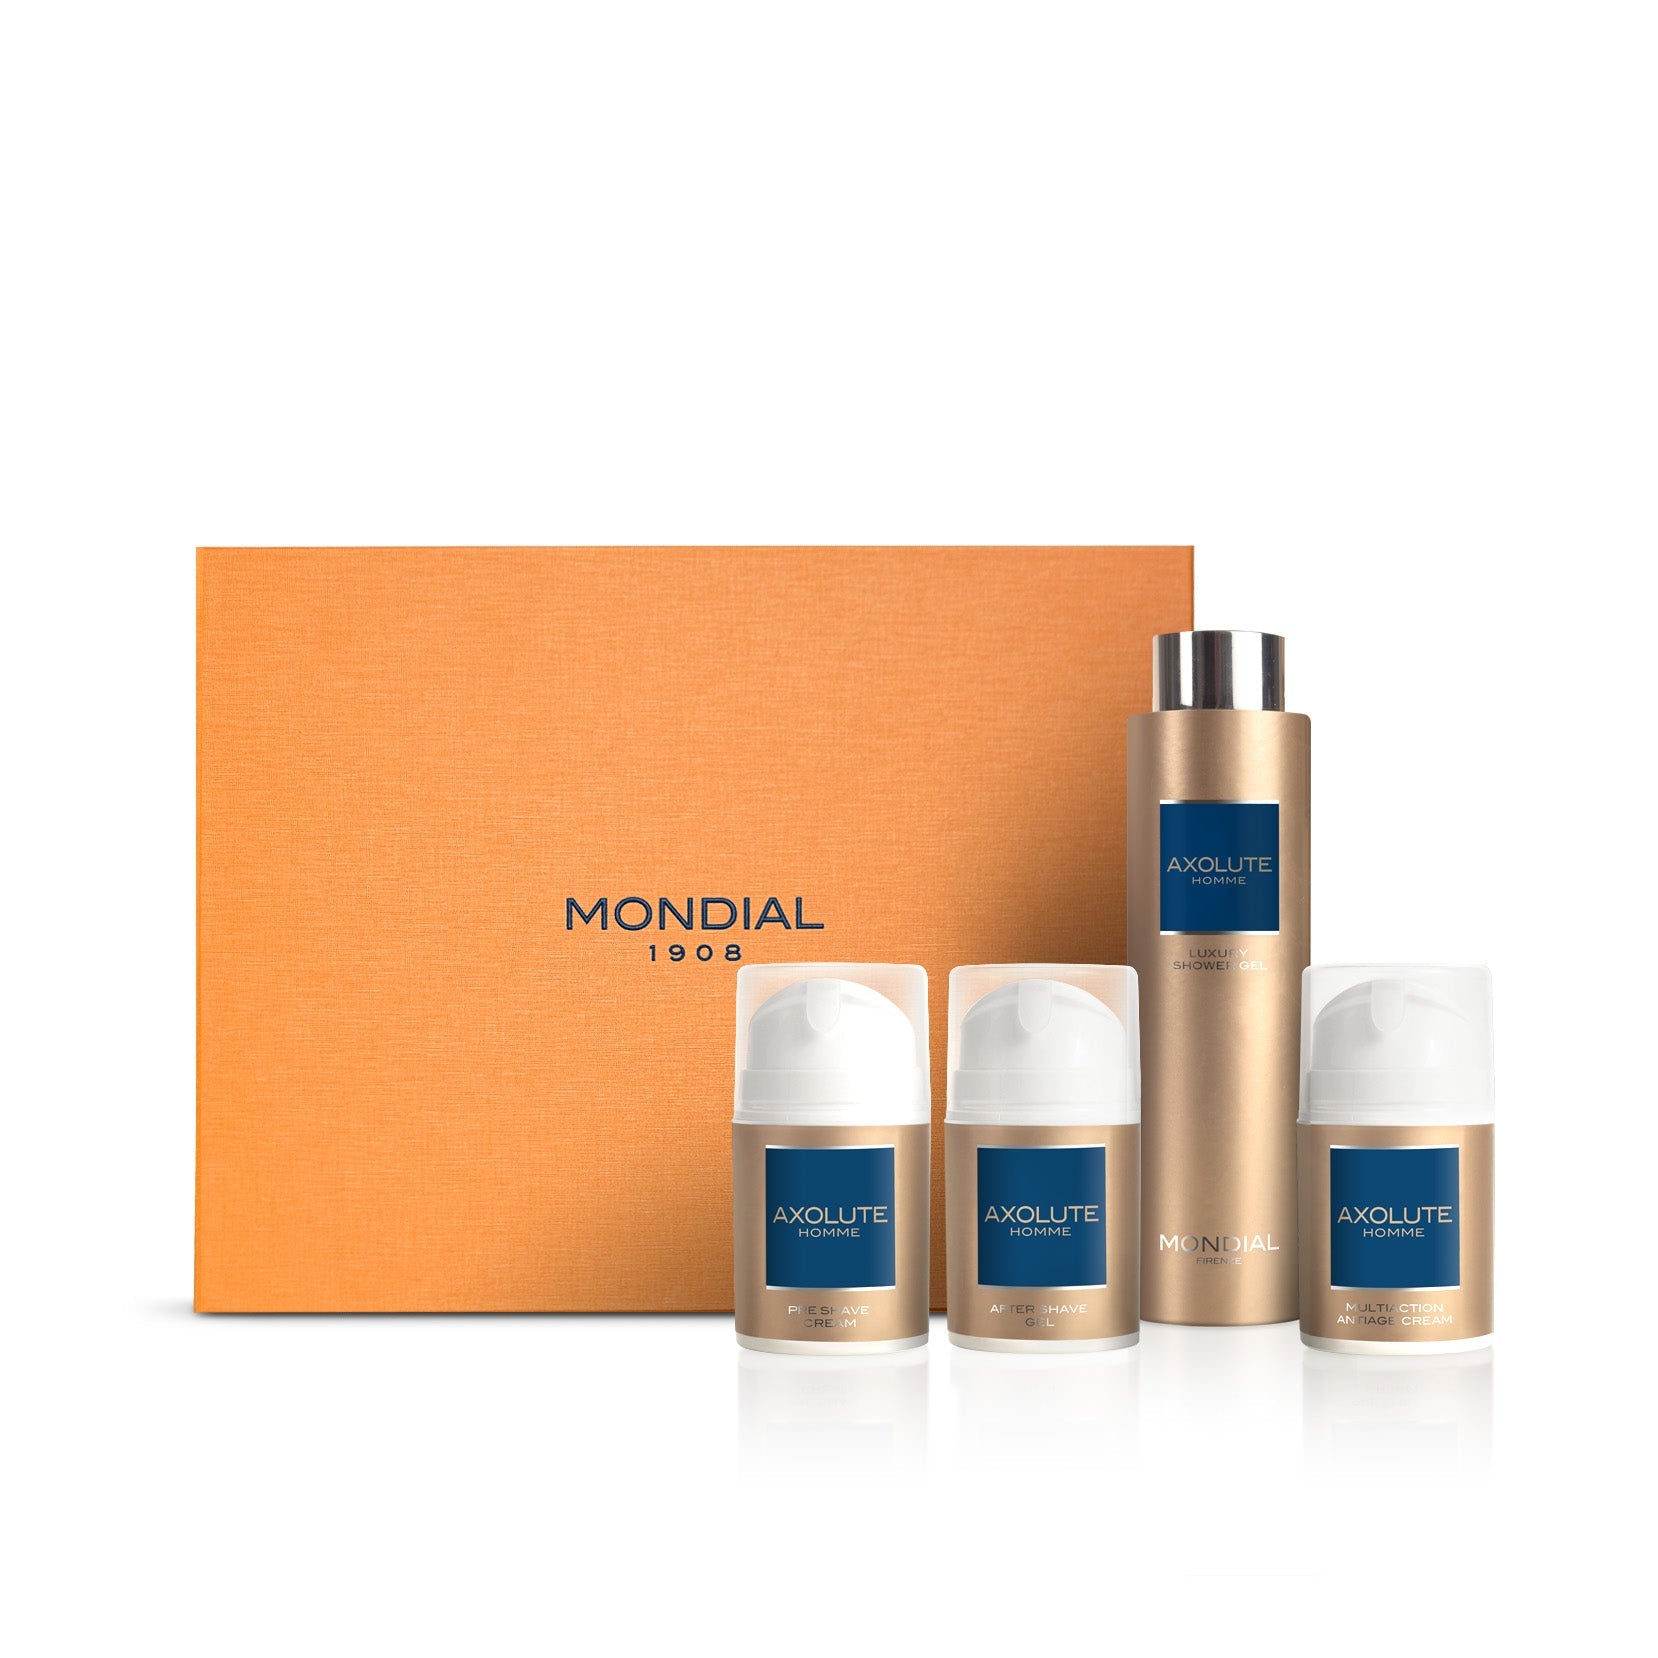 Gift Set Royal: – Cream EU & Gel 1908 Shaving Axolute Anti-Aging with Shower Shave Mondial Care